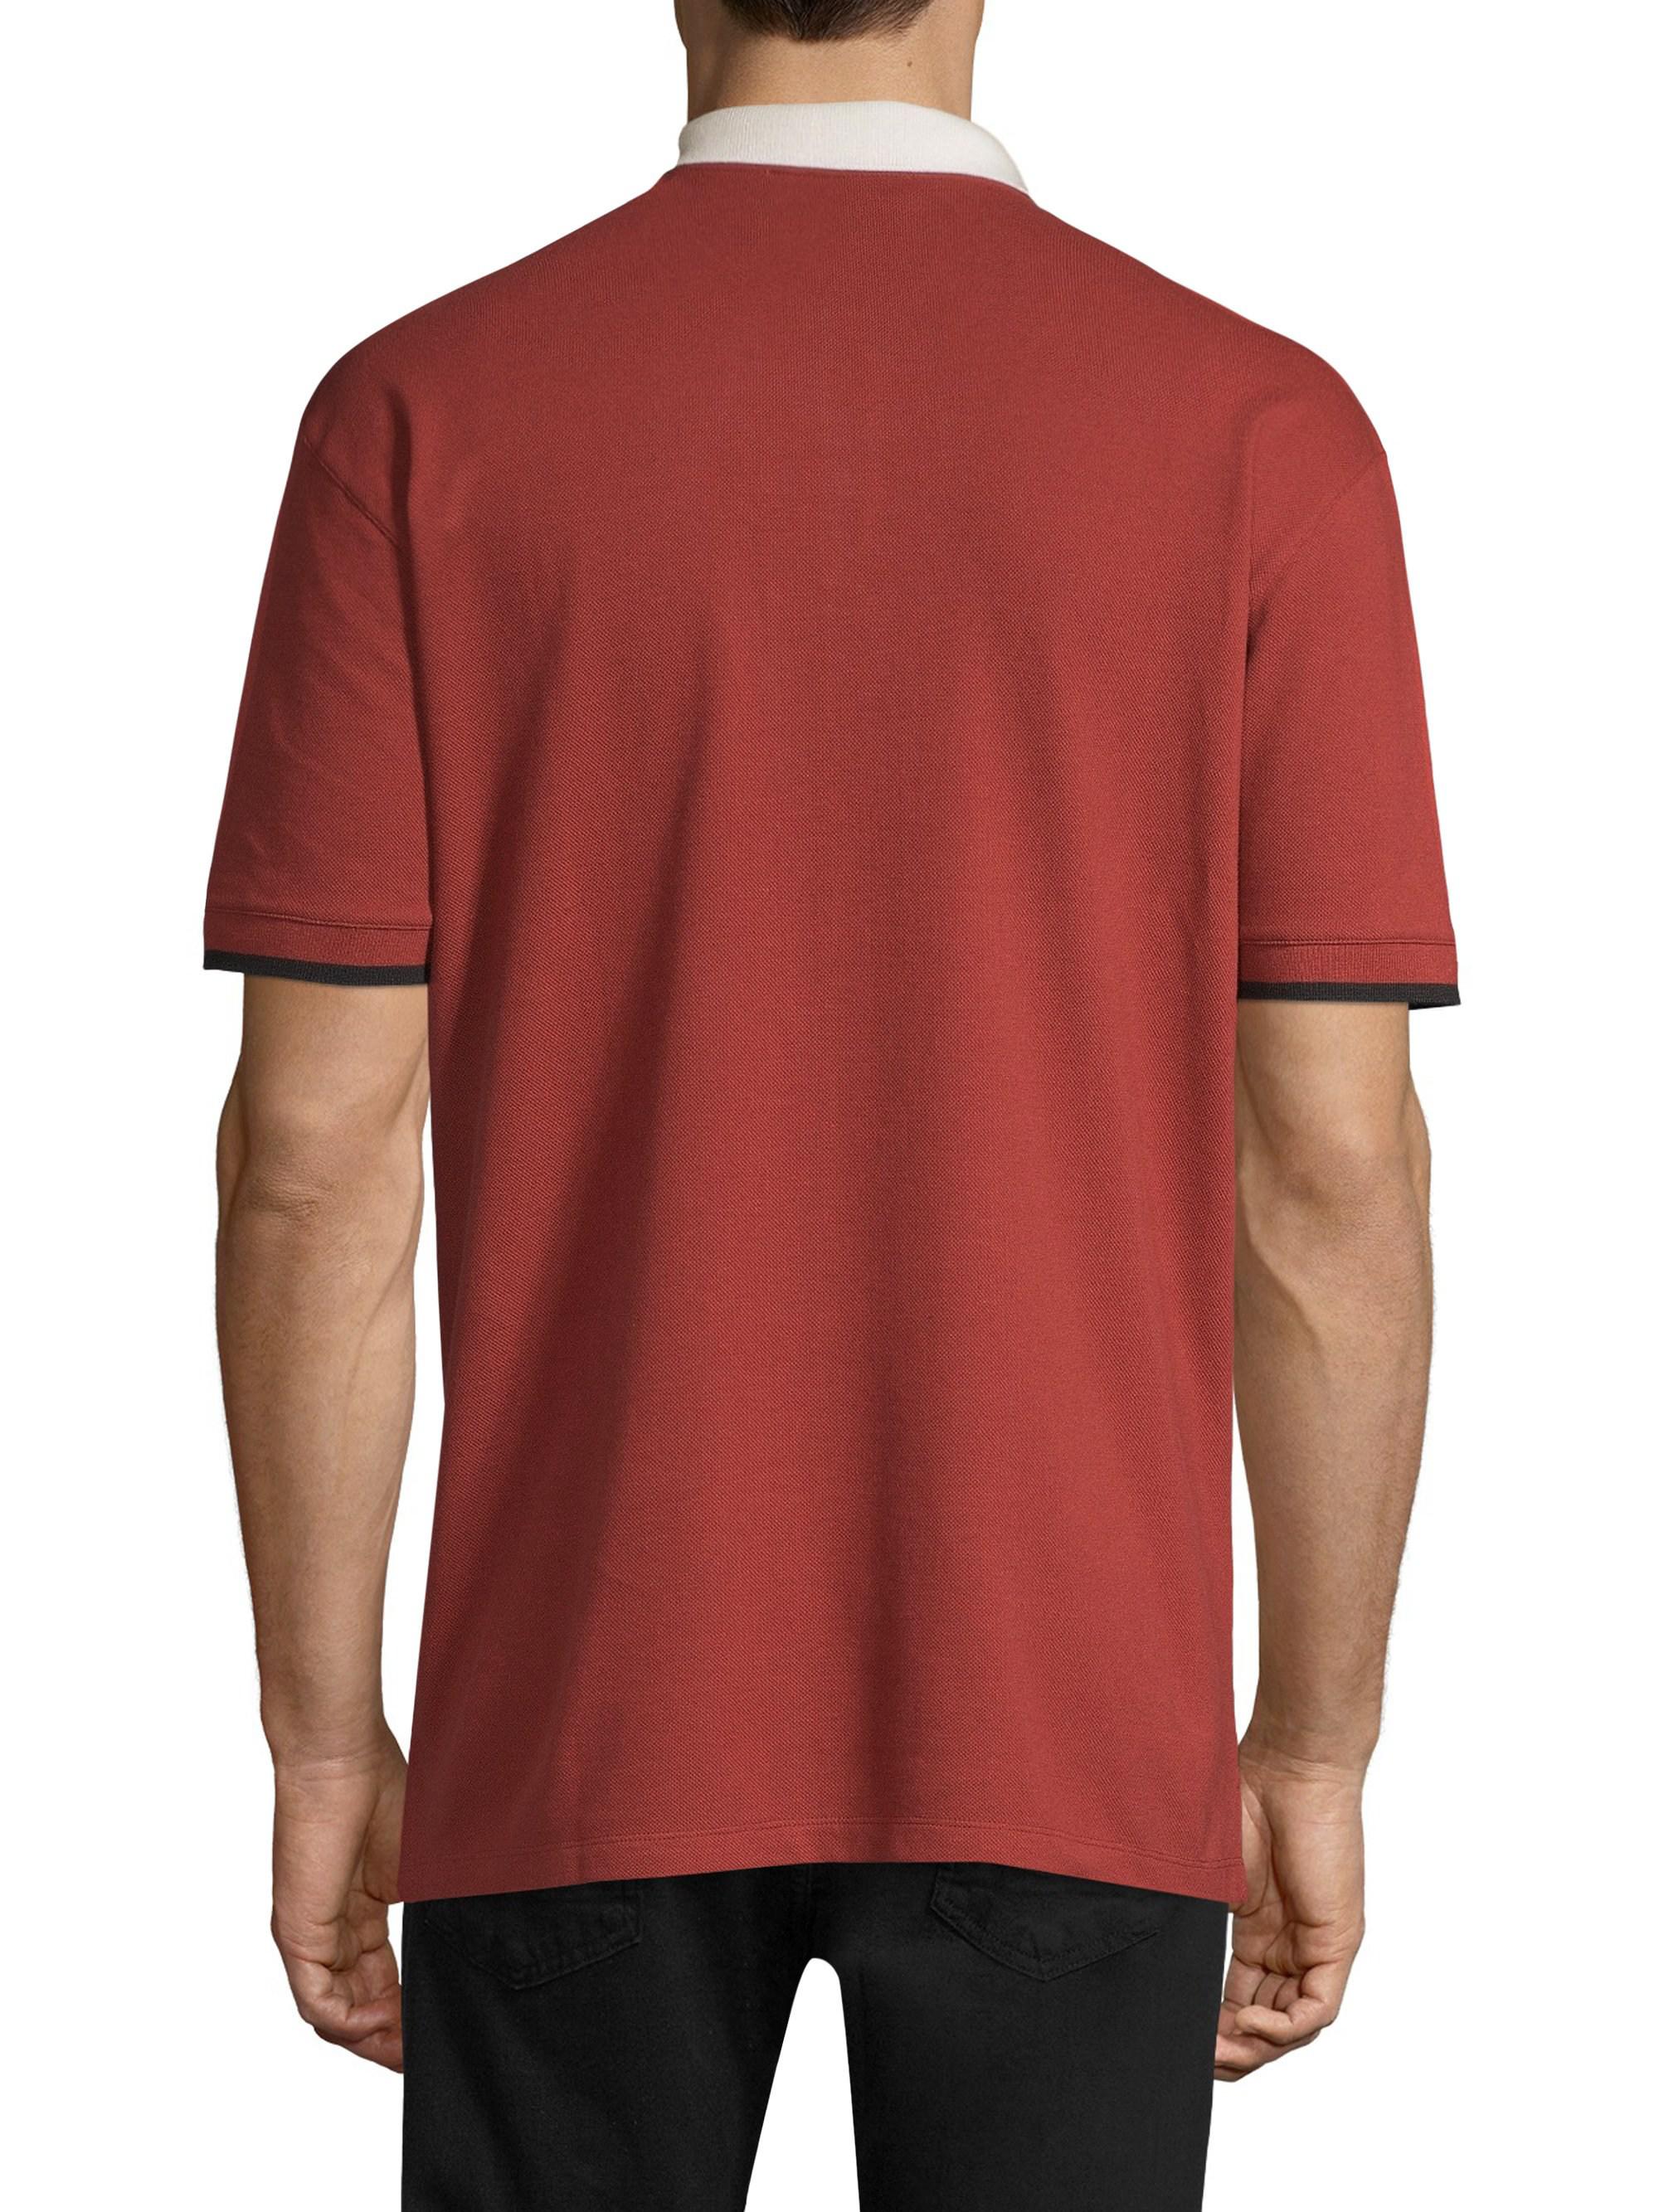 Bally Cotton Colorblock Polo Shirt in Red for Men - Lyst